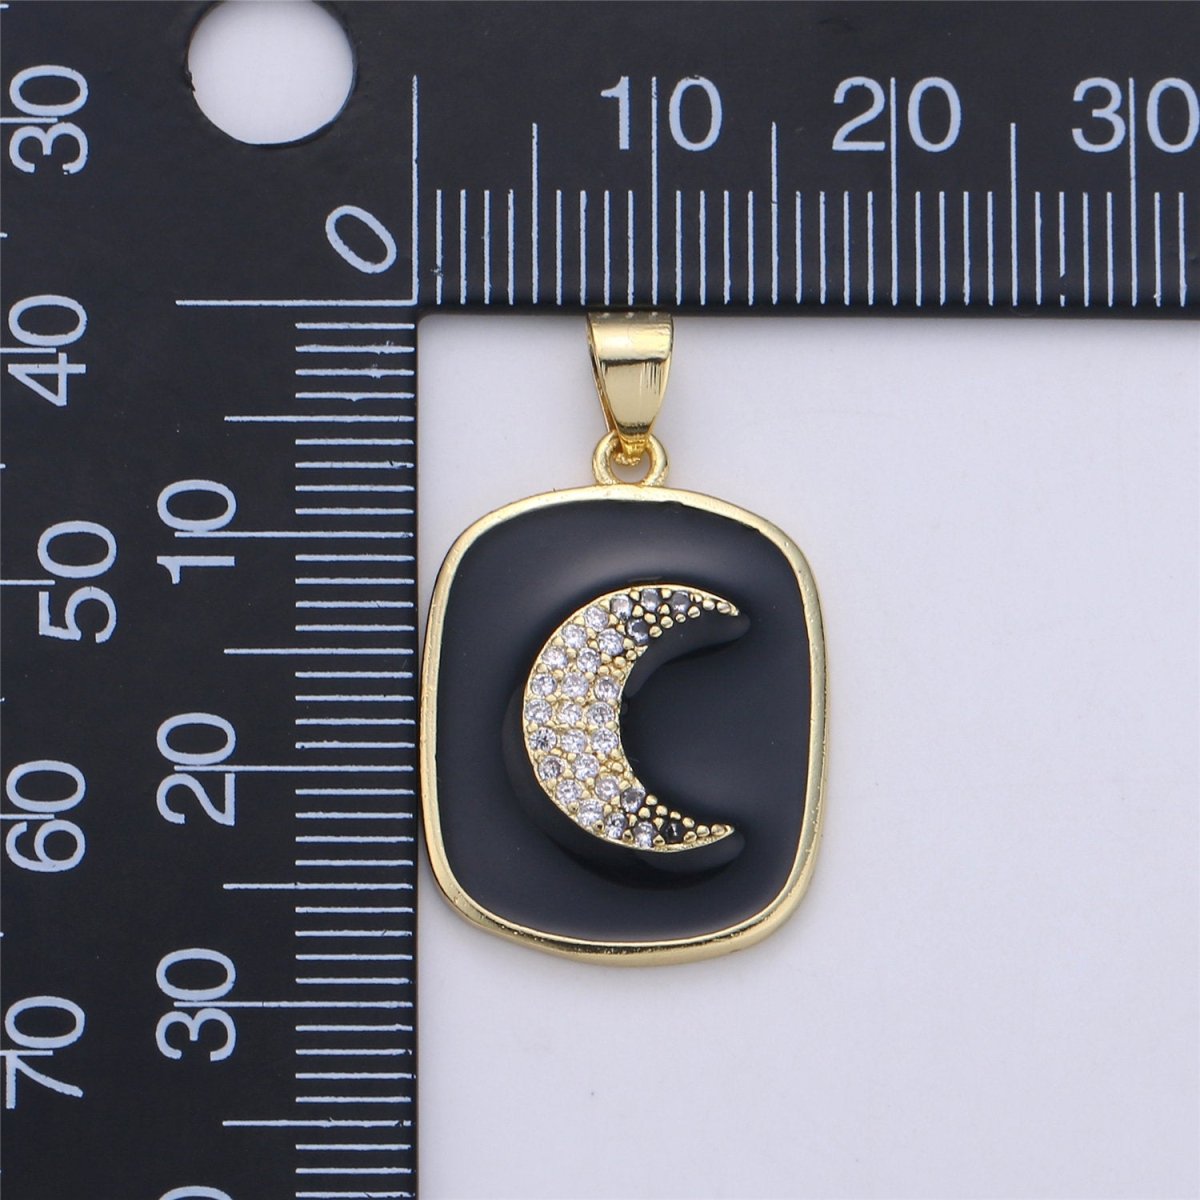 Gold Enamel Moon Charm Military Tag Pendant, Black White Celestial Charm, Enamel Jewelry for Necklace Component I-450 I-451 - DLUXCA